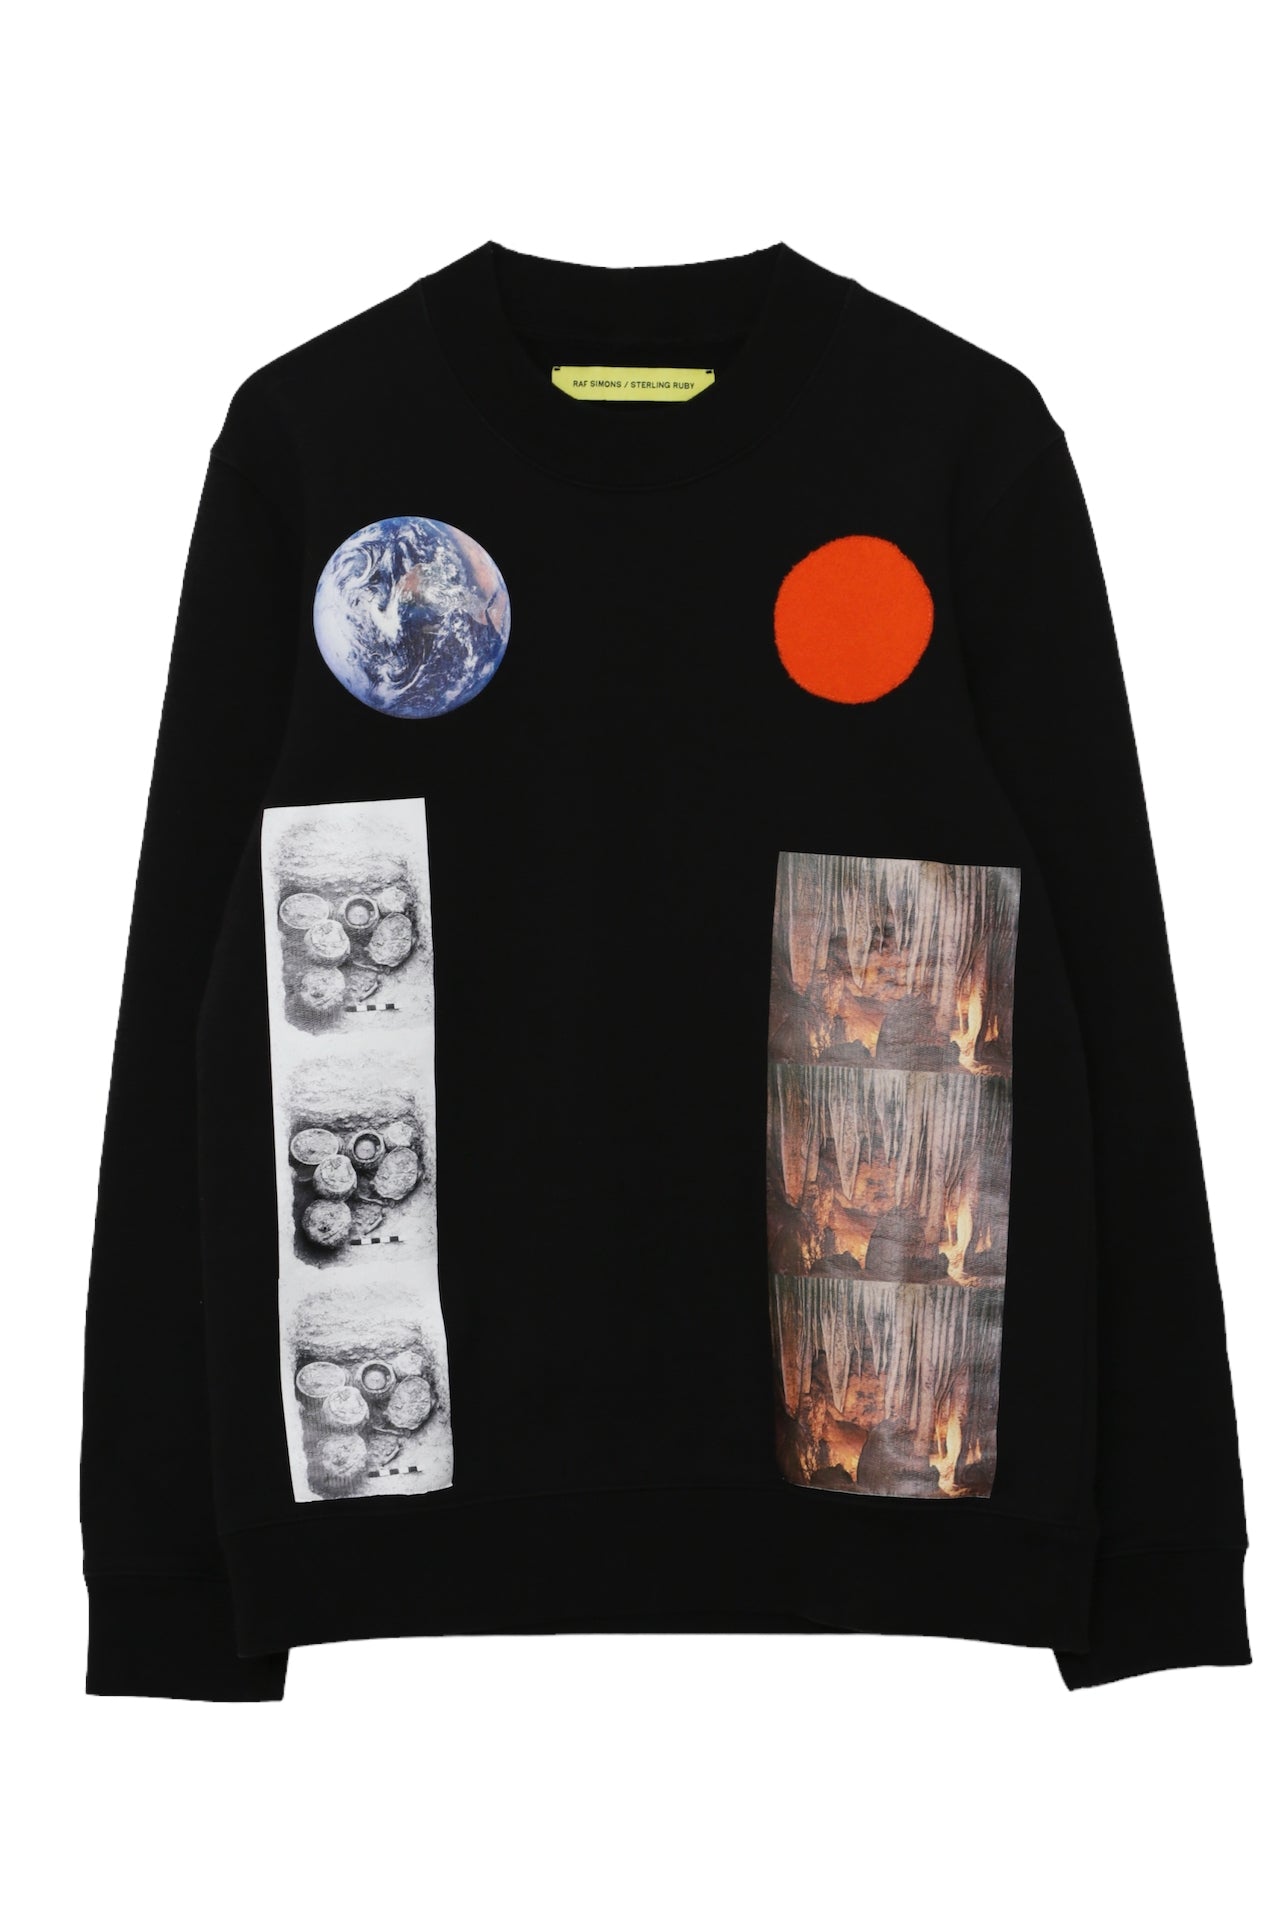 2014AW RAF SIMONS × STERLING RUBY GRAPHIC SWEAT TOP